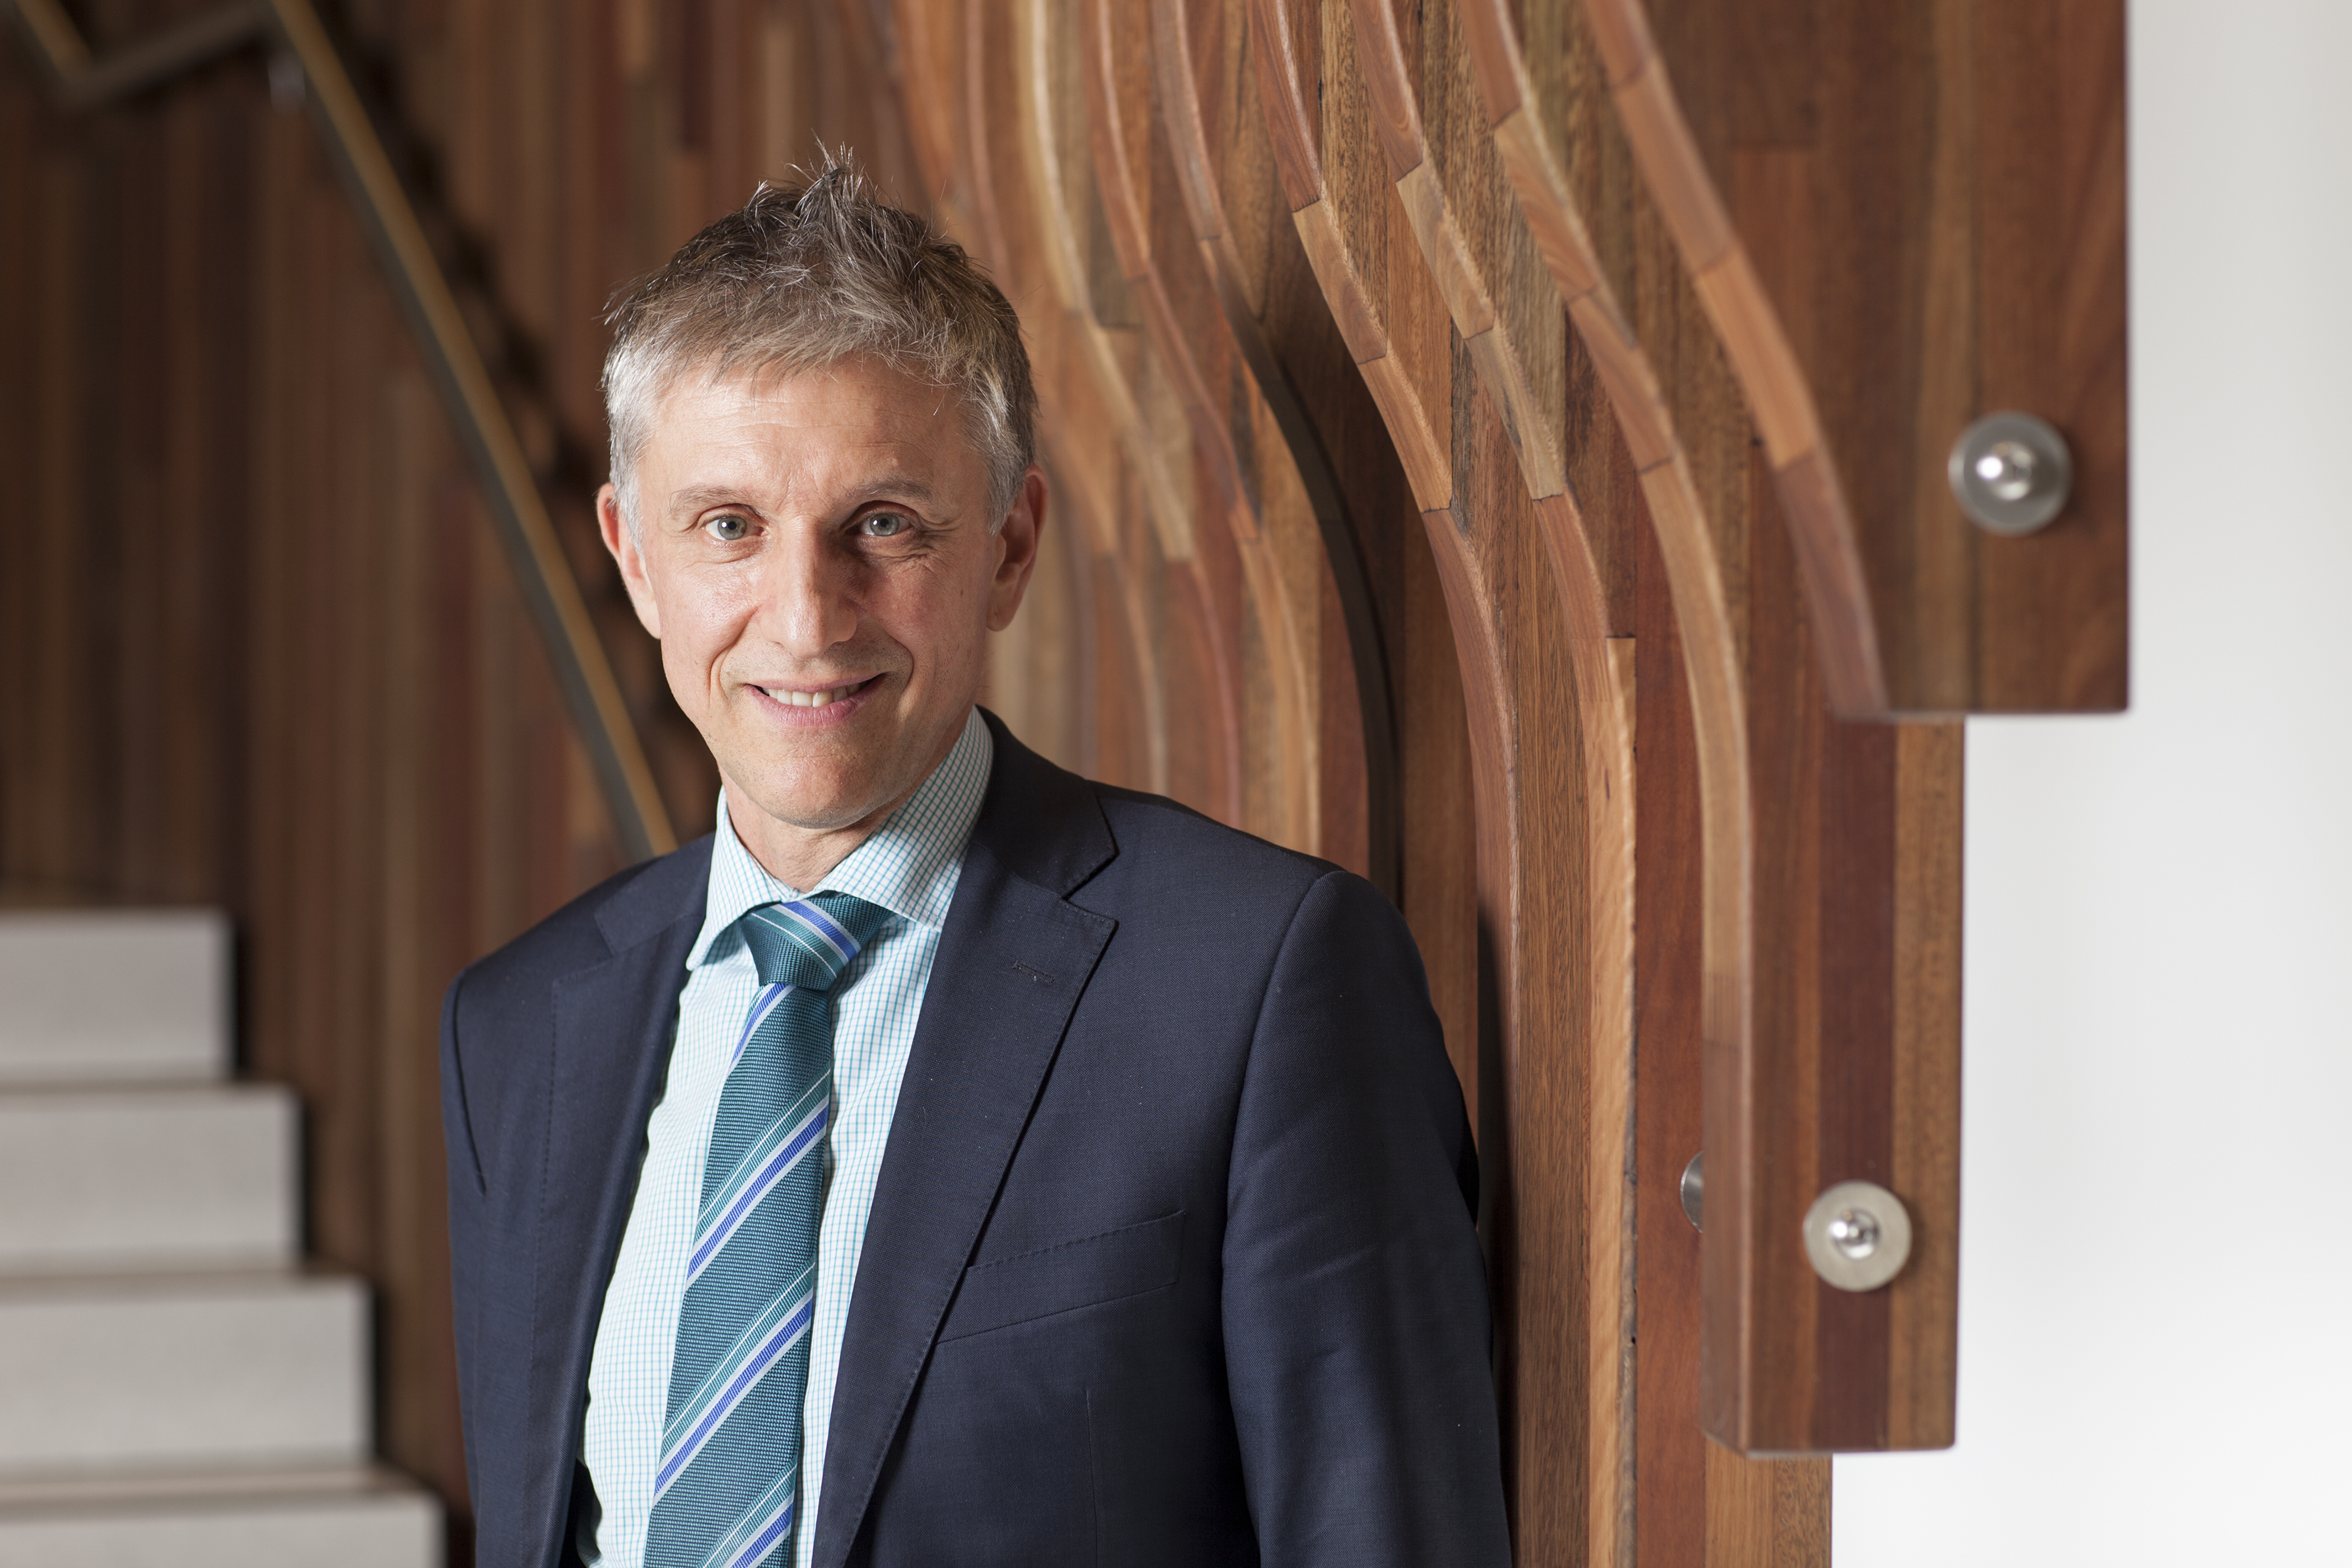 ProfessorGrant McArthur is the executive director at the Victorian Comprehensive Cancer Centre